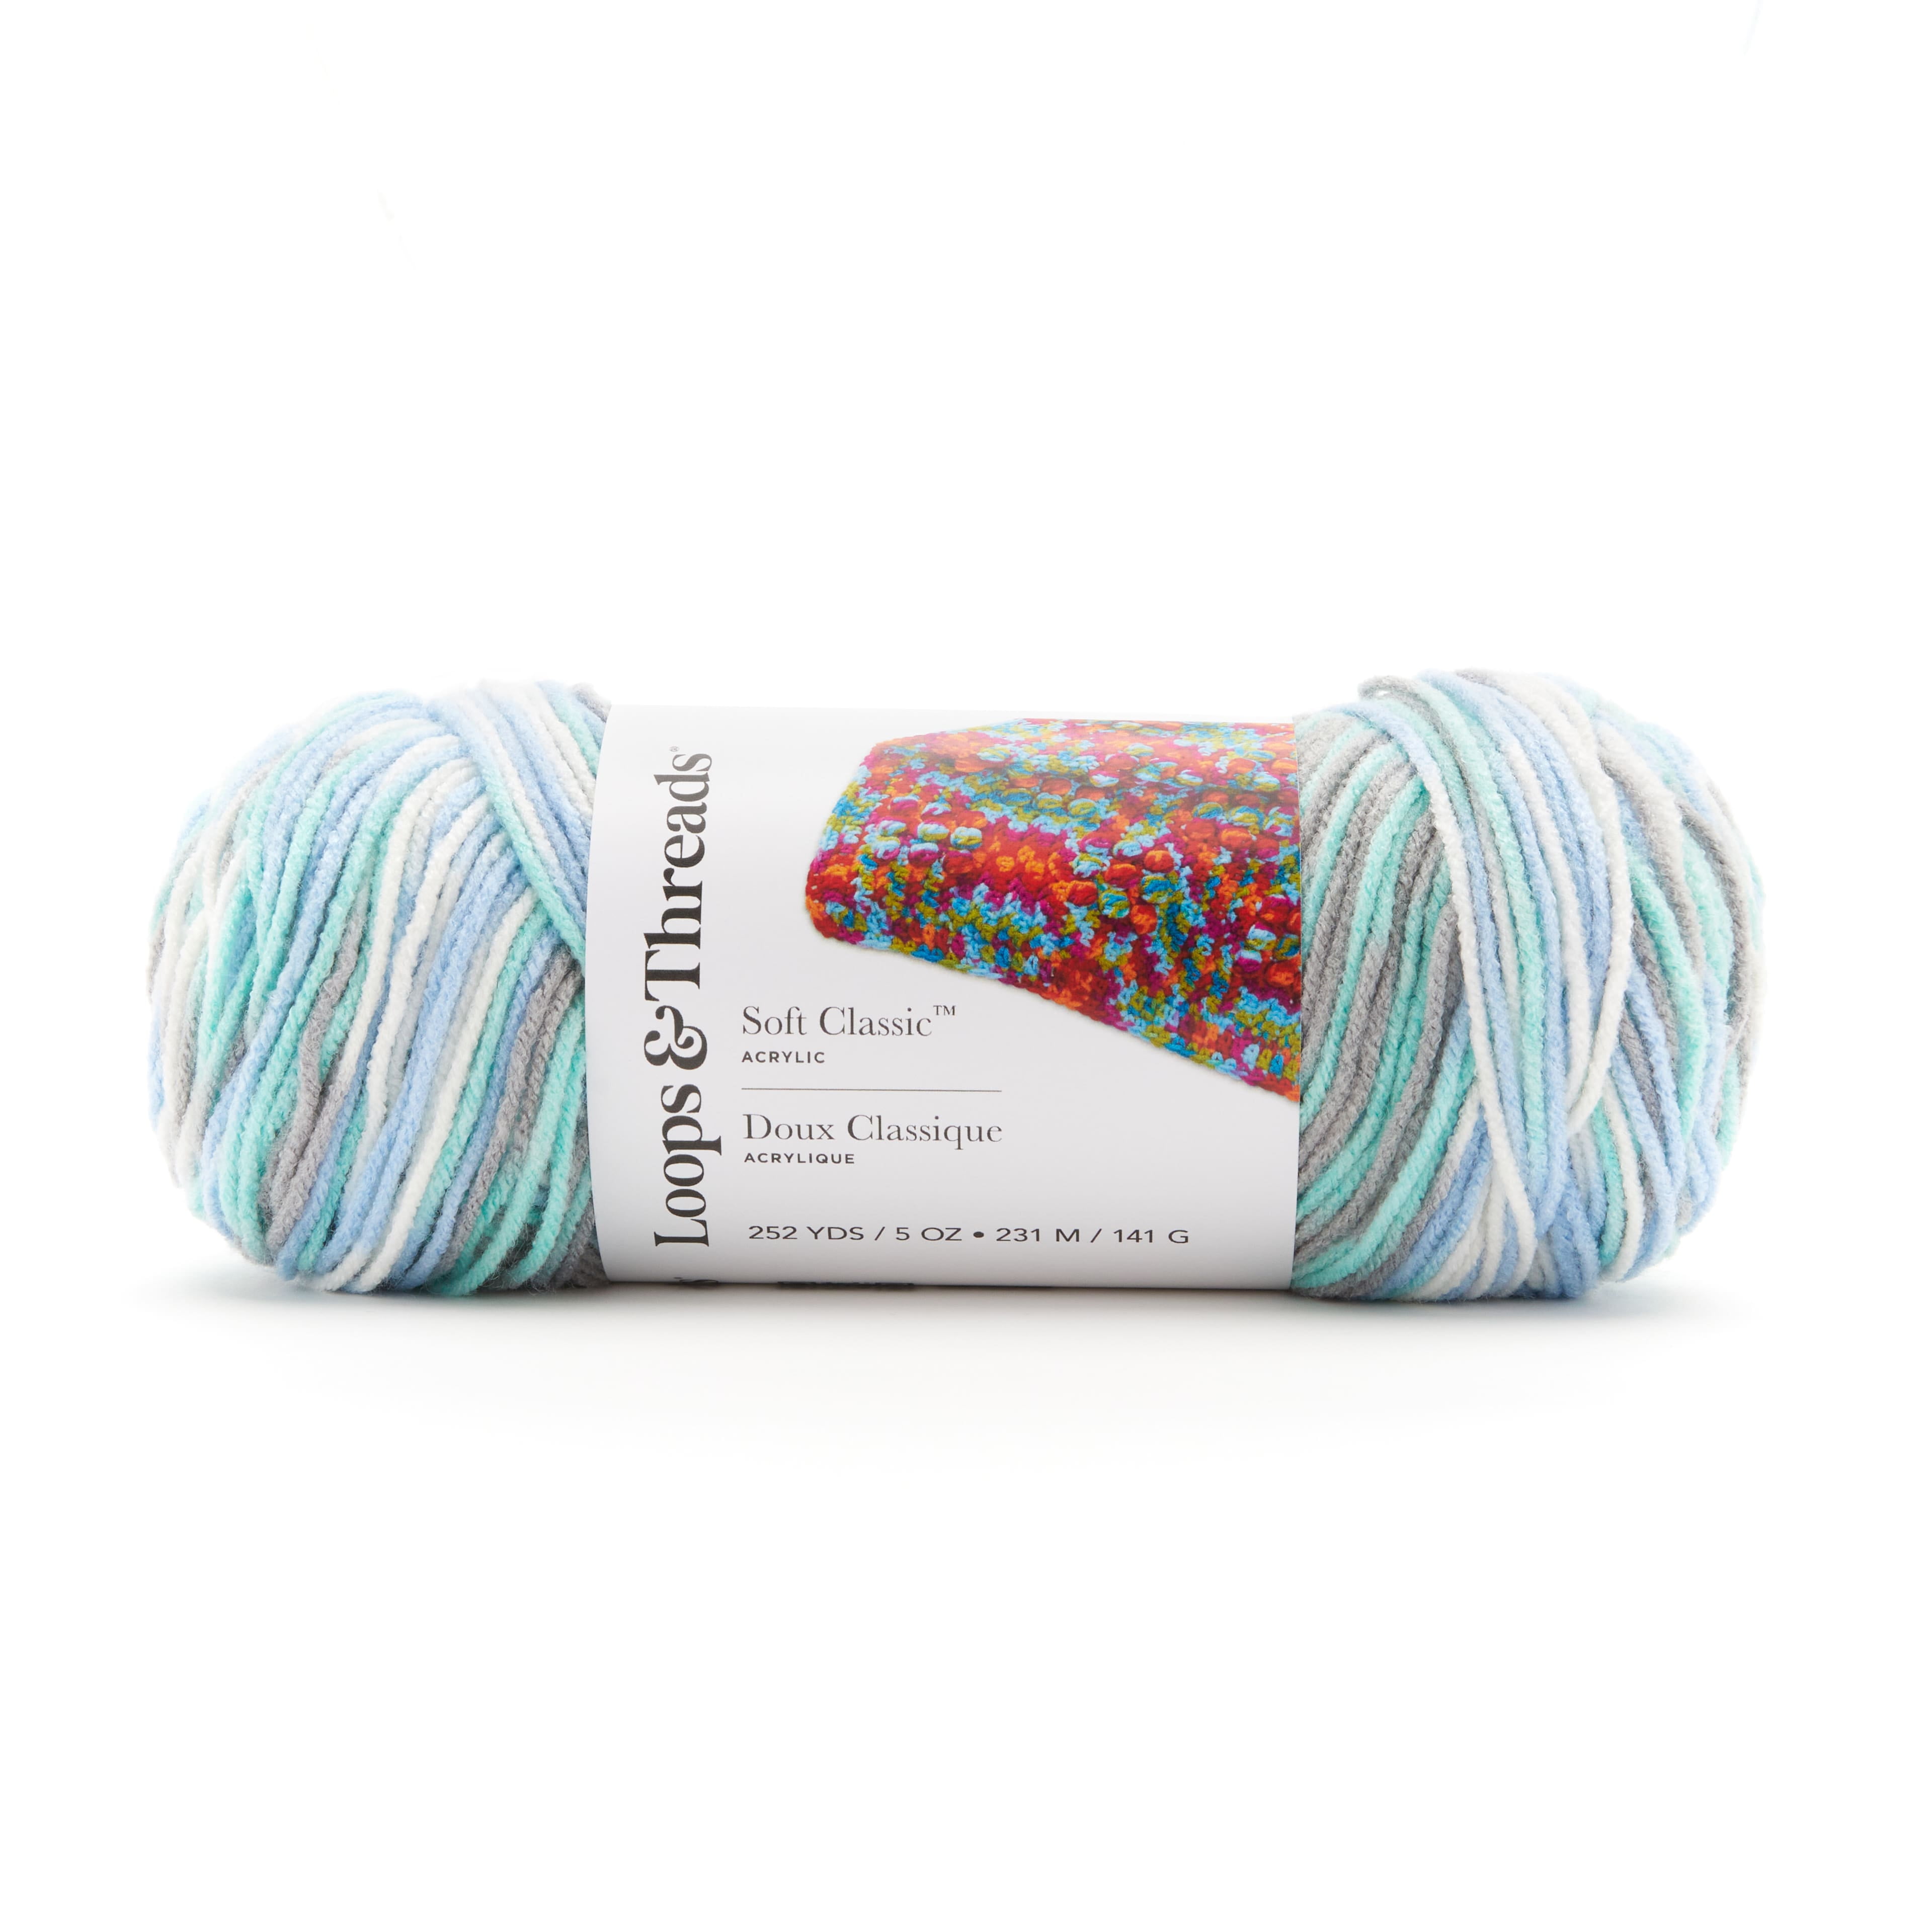 Soft Classic Multi Ombre Yarn by Loops & Threads - Multicolor Yarn for  Knitting, Crochet, Weaving, Arts & Crafts - Bluebird, Bulk 12 Pack 